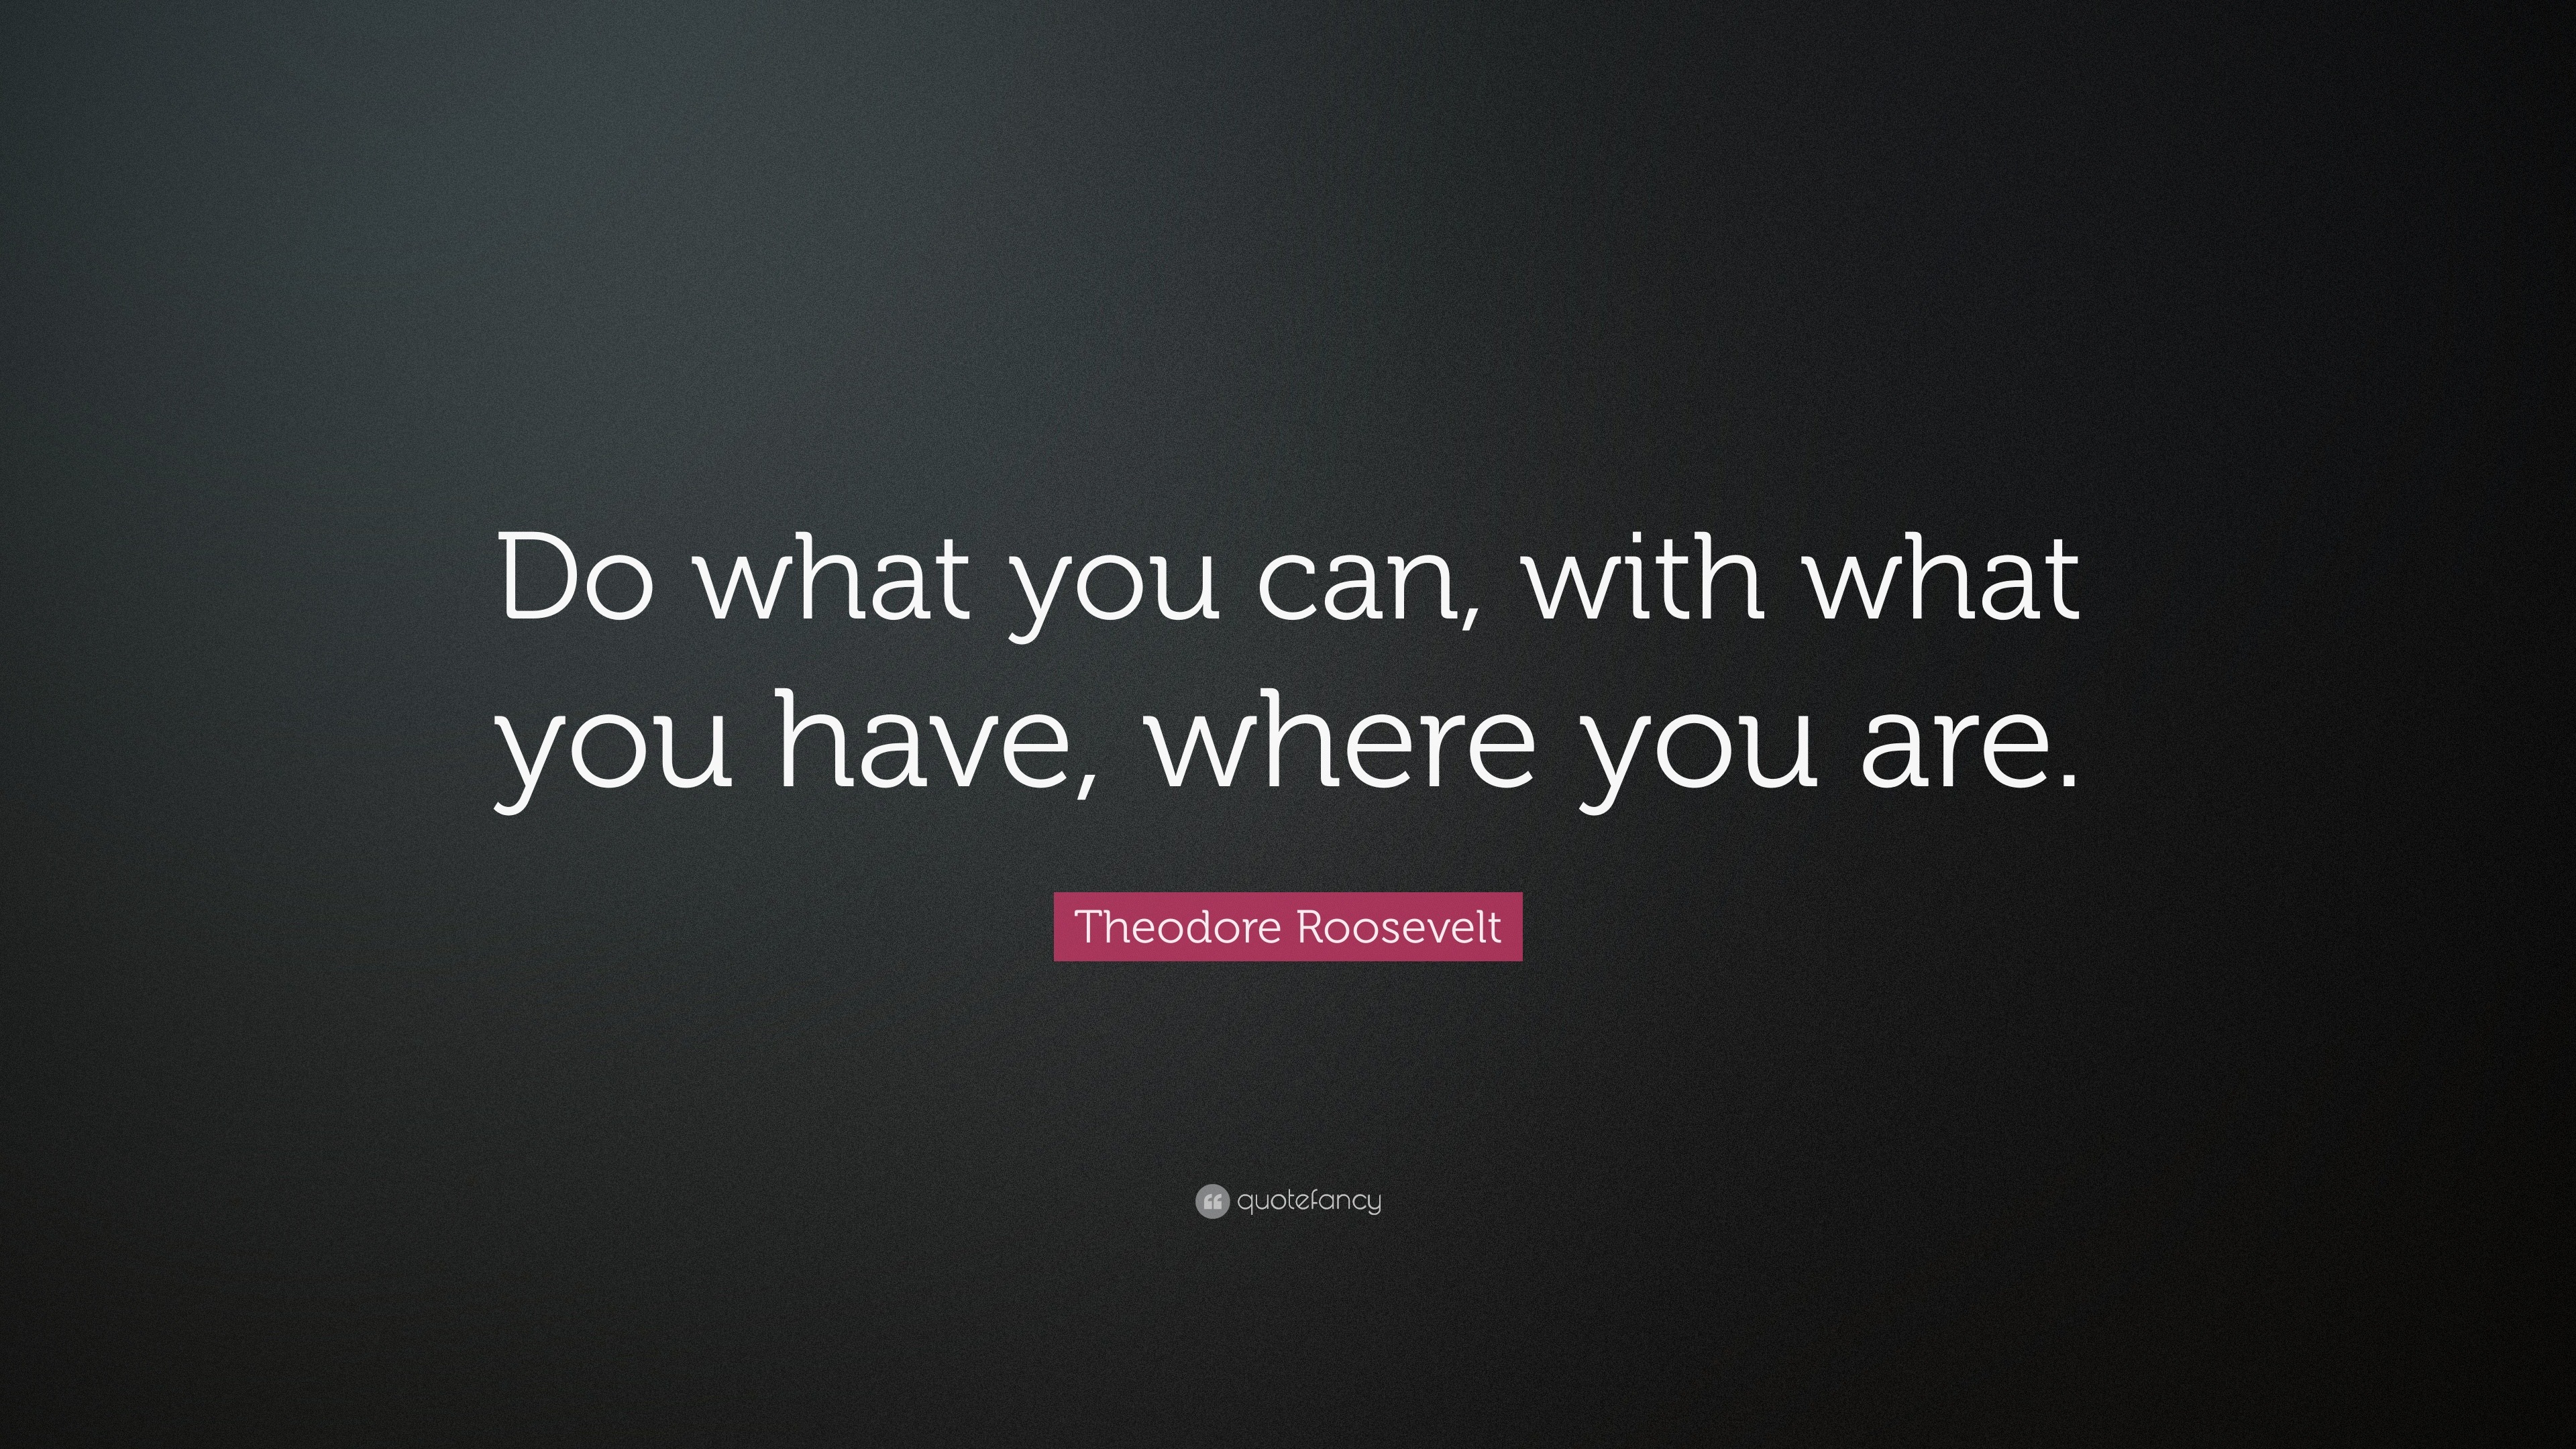 Where you be when i saw you. Do what you can with what you have where you are. Theodore Roosevelt do what you can. What can you do. What can you do картинки.